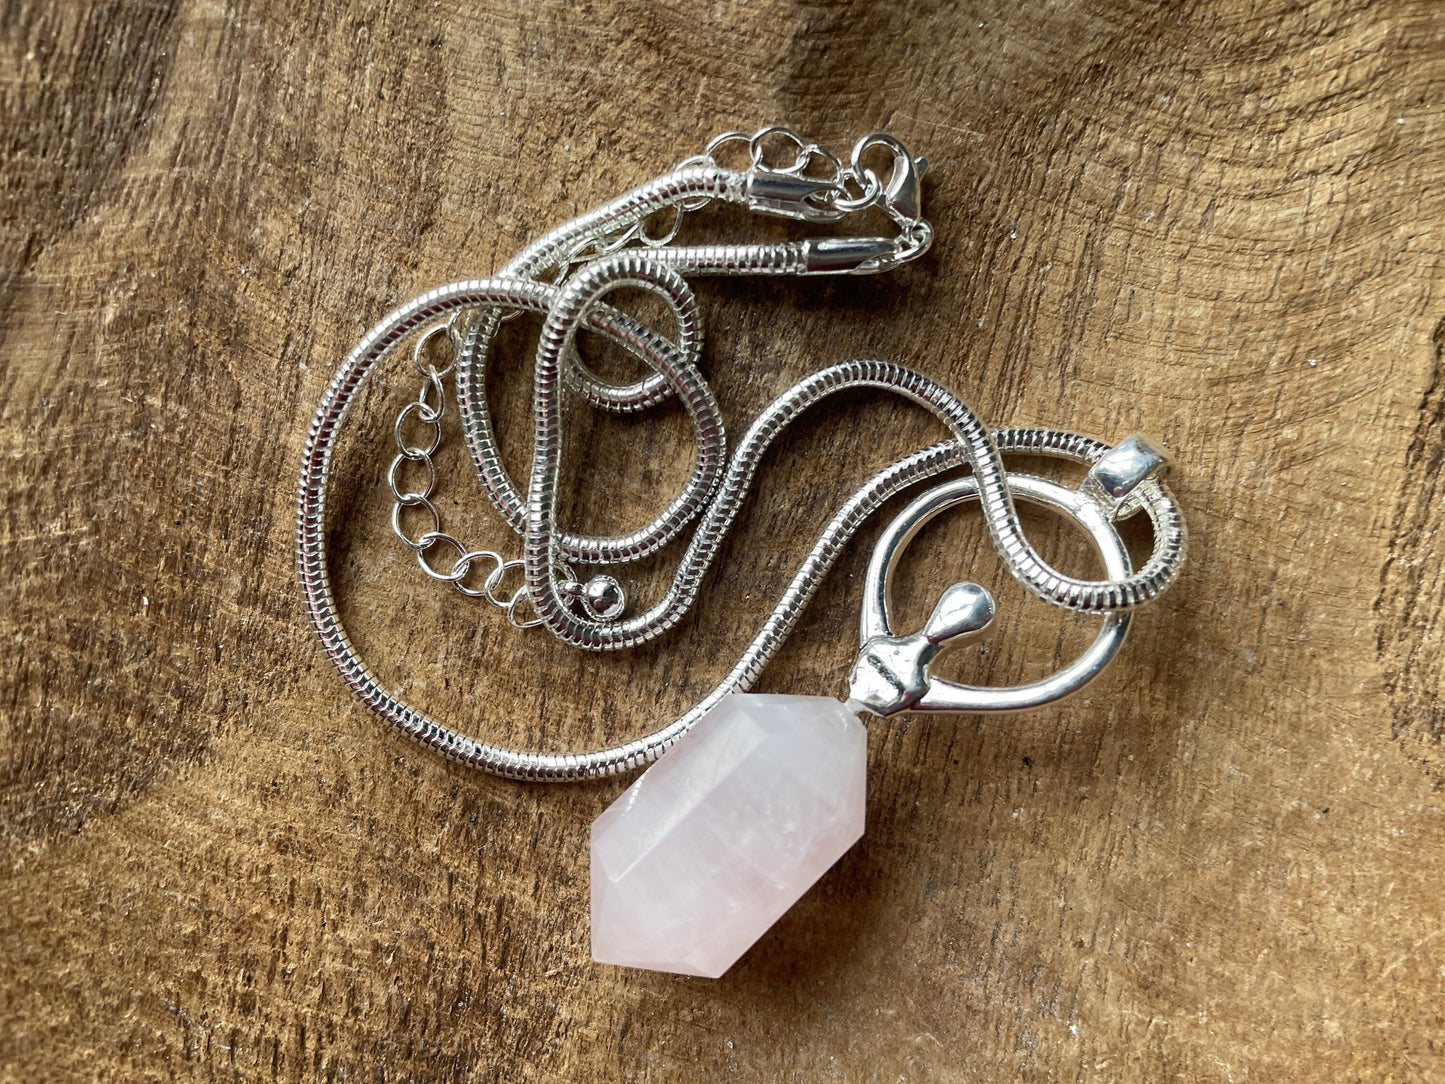 Beautiful Rose Quartz Goddess Pendant Vogel Point with silver plated chain